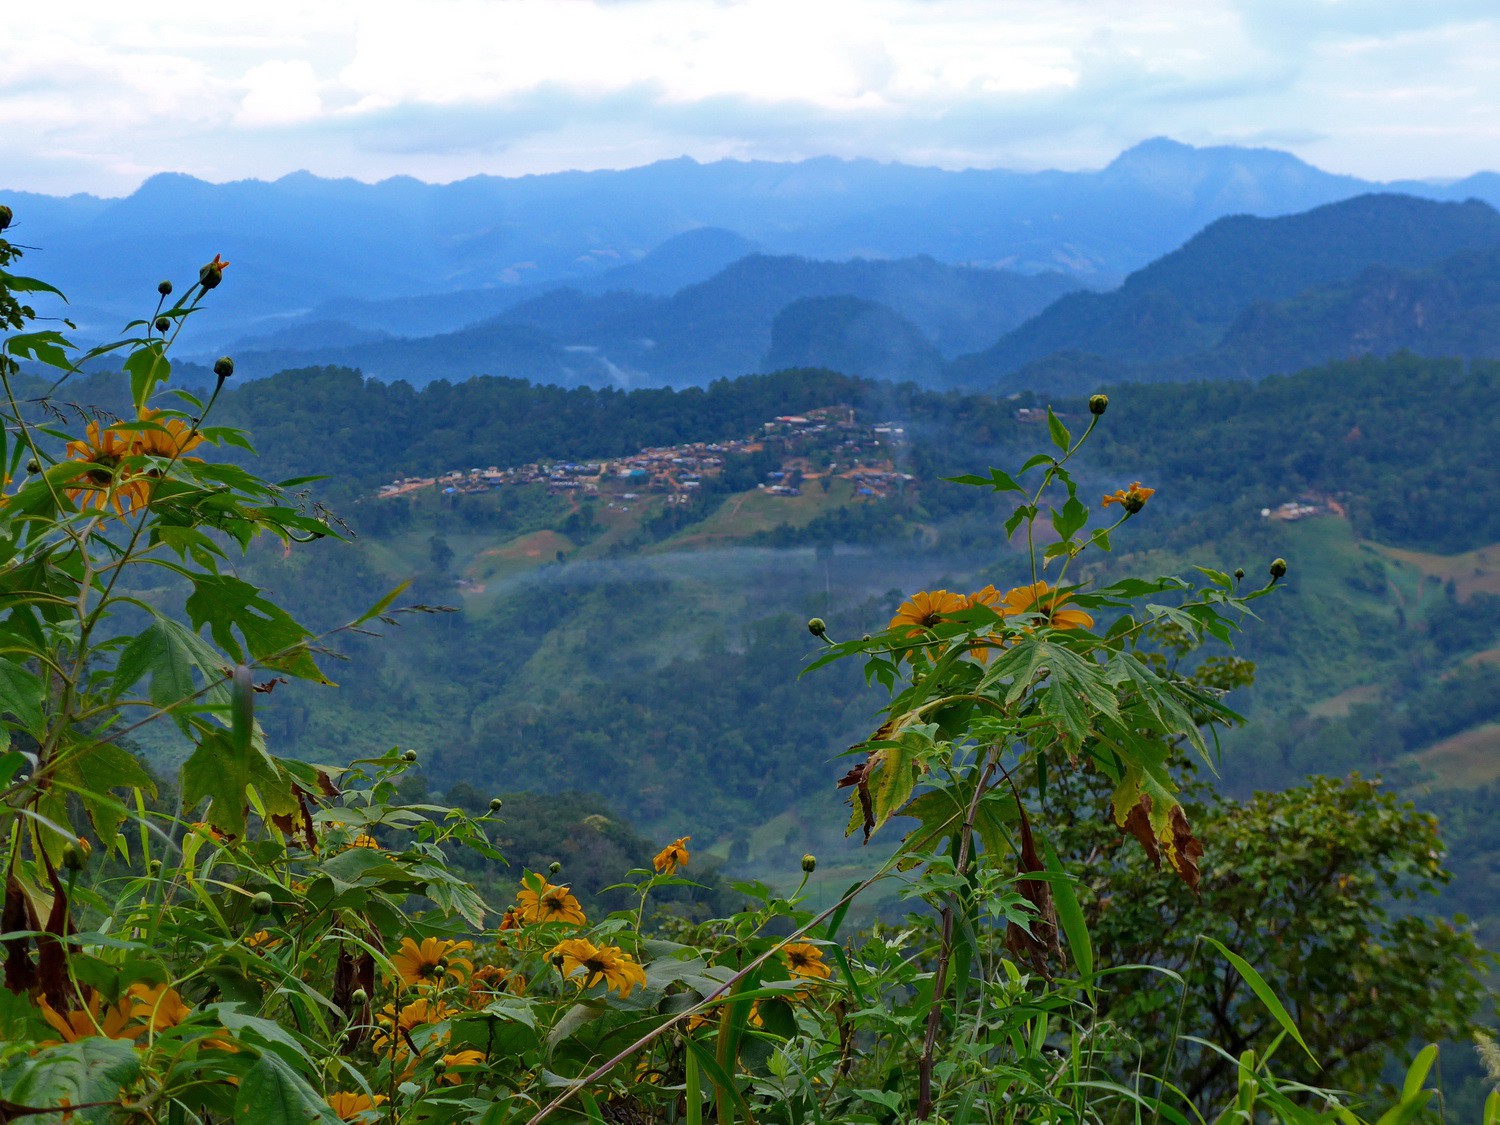 Western view from the trail to Doi Luang Chiang Dao